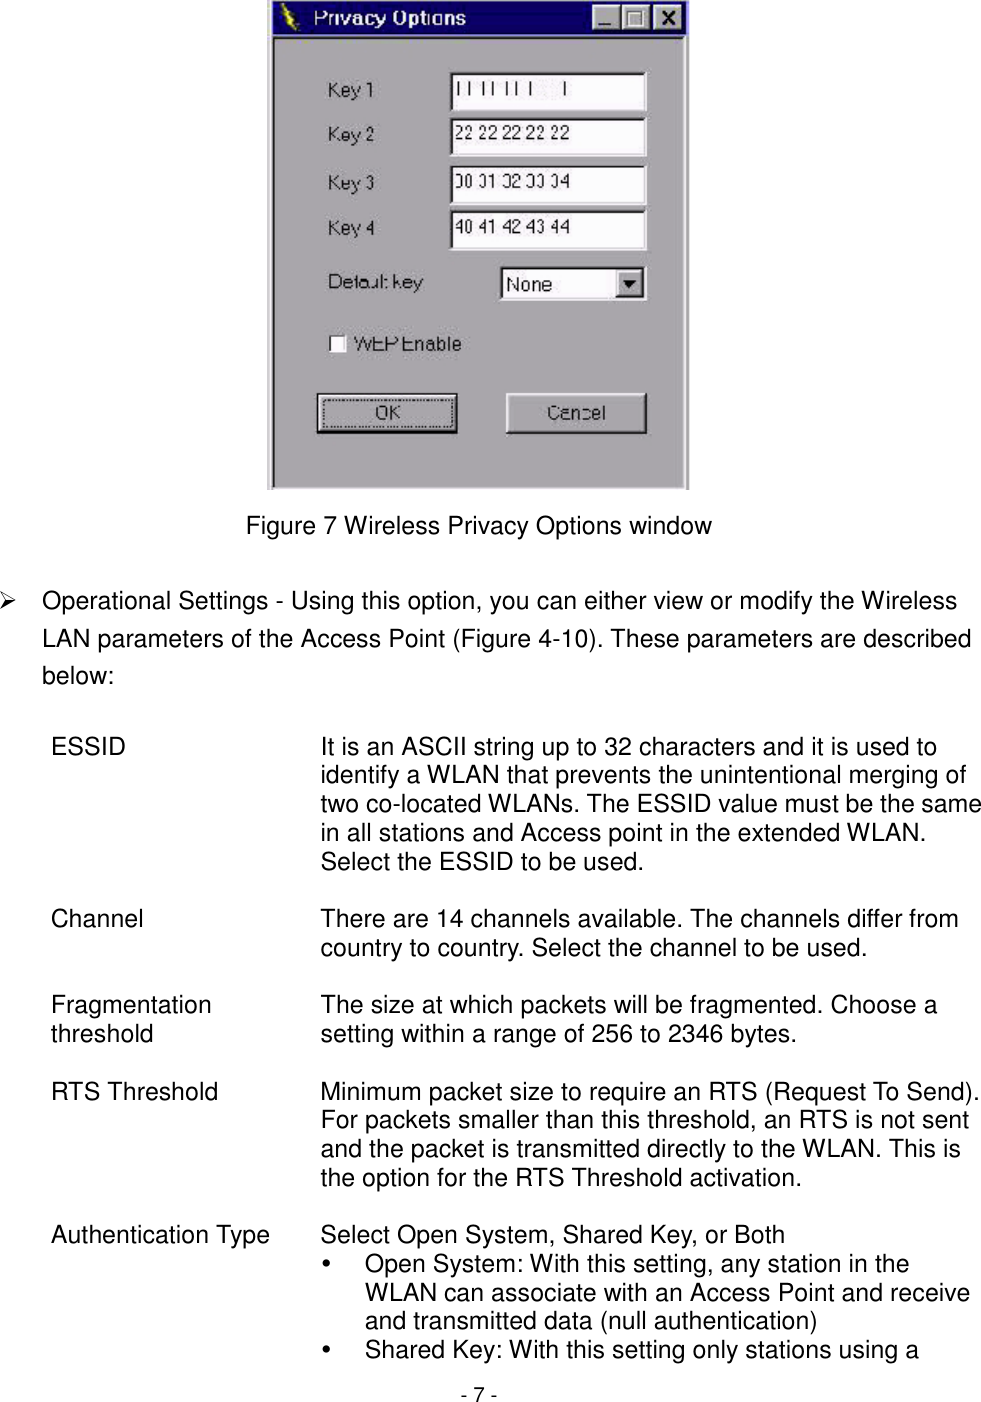 - 7 -Figure 7 Wireless Privacy Options window#  Operational Settings - Using this option, you can either view or modify the WirelessLAN parameters of the Access Point (Figure 4-10). These parameters are describedbelow:ESSID It is an ASCII string up to 32 characters and it is used toidentify a WLAN that prevents the unintentional merging oftwo co-located WLANs. The ESSID value must be the samein all stations and Access point in the extended WLAN.Select the ESSID to be used.Channel There are 14 channels available. The channels differ fromcountry to country. Select the channel to be used.Fragmentationthreshold The size at which packets will be fragmented. Choose asetting within a range of 256 to 2346 bytes.RTS Threshold Minimum packet size to require an RTS (Request To Send).For packets smaller than this threshold, an RTS is not sentand the packet is transmitted directly to the WLAN. This isthe option for the RTS Threshold activation.Authentication Type Select Open System, Shared Key, or Both!  Open System: With this setting, any station in theWLAN can associate with an Access Point and receiveand transmitted data (null authentication)!  Shared Key: With this setting only stations using a